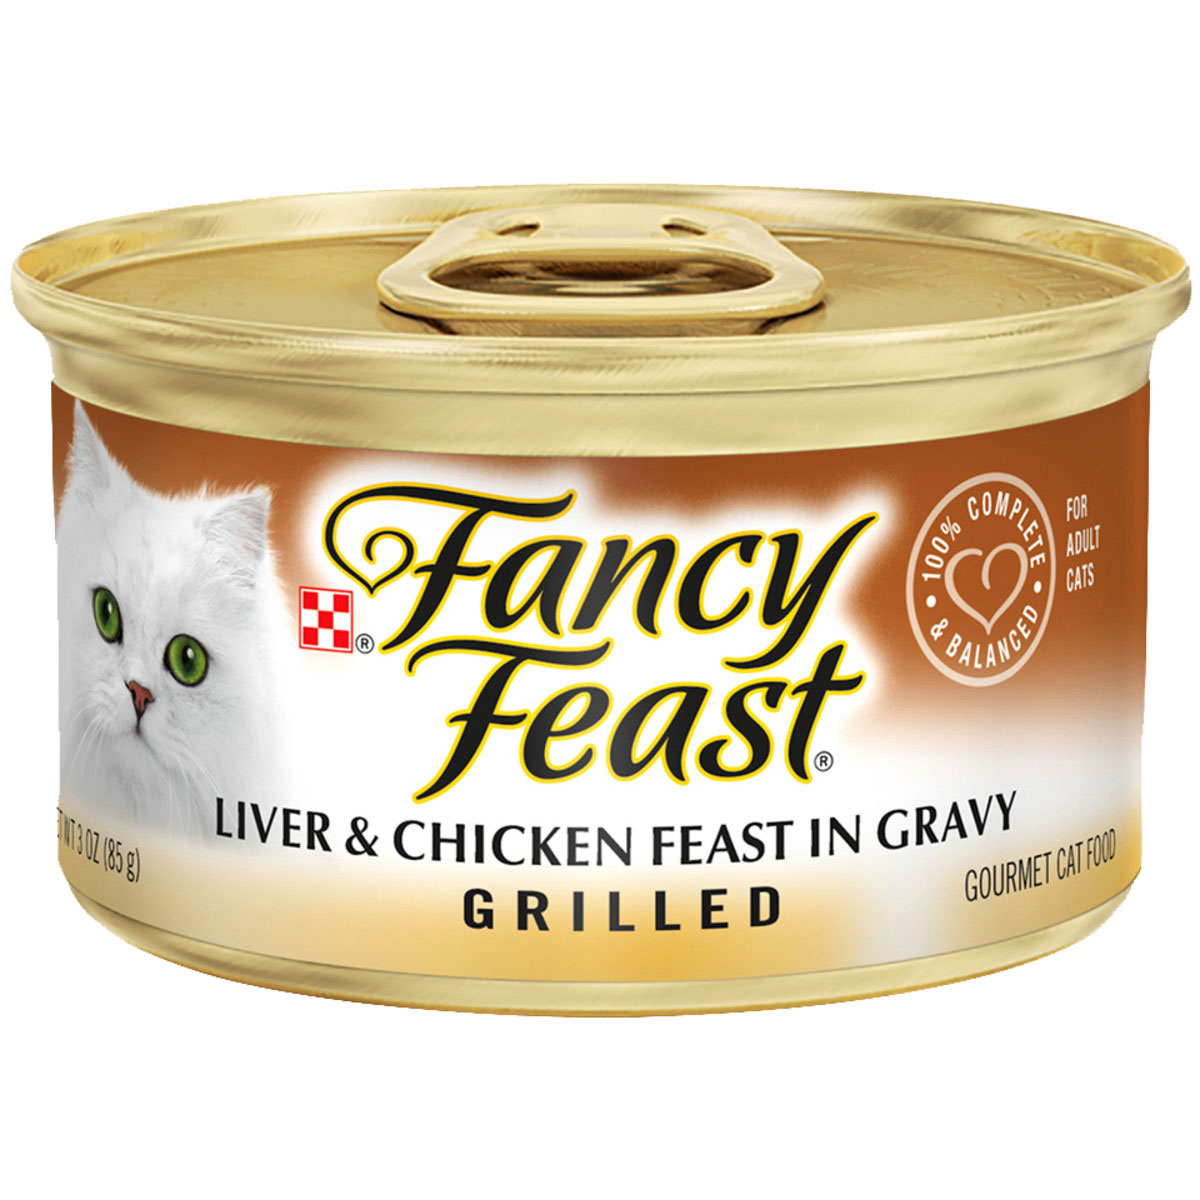 Purina Fancy Feast Gravy Wet Cat Food, Grilled Liver & Chicken Feast - 3 Ounce Can